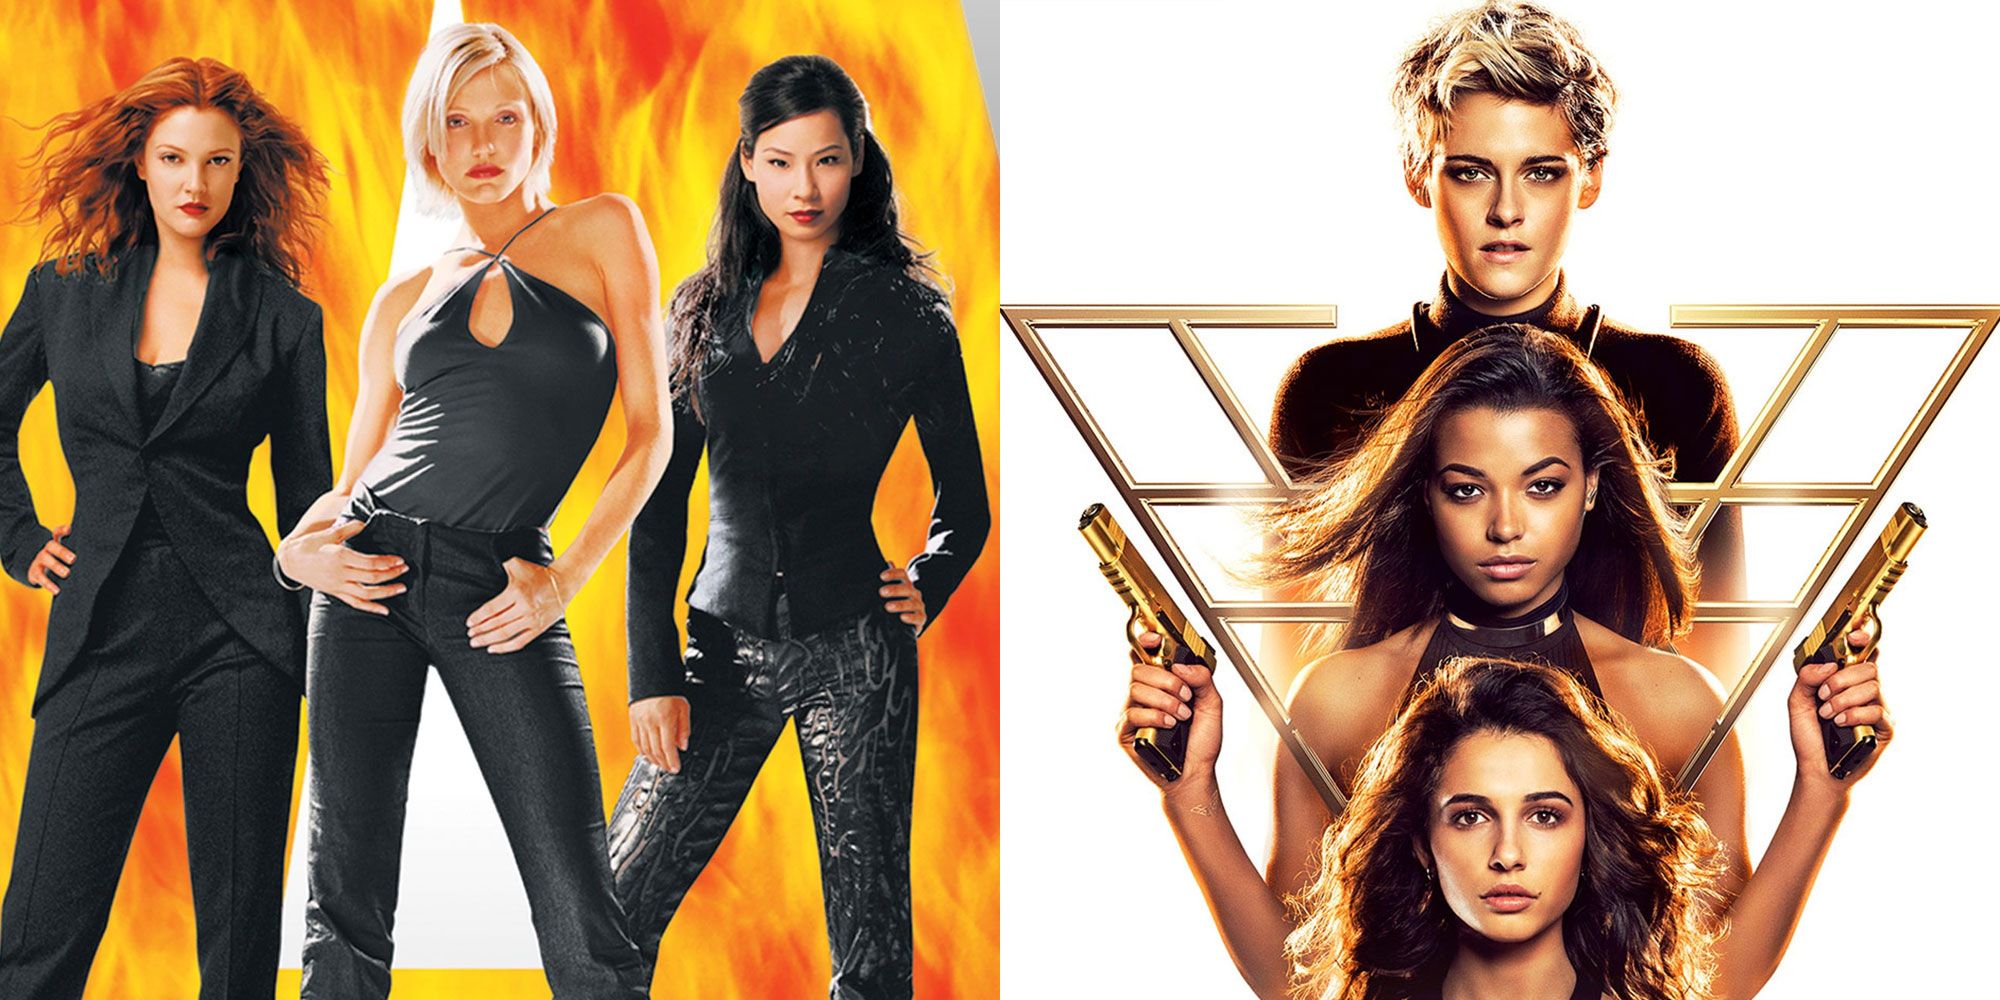 A split image features the Charlie's Angels trios of both movie remakes